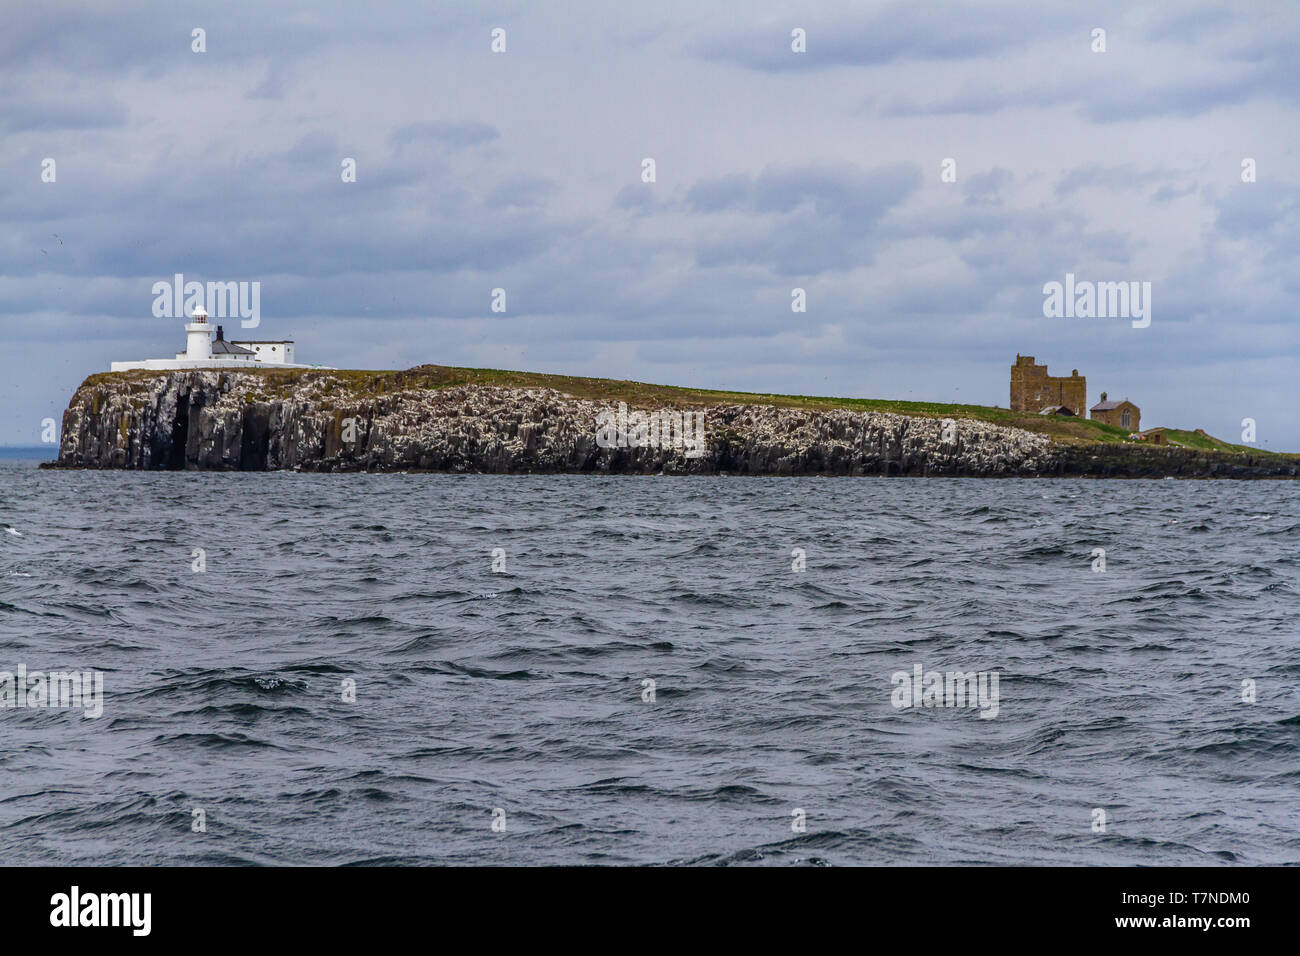 Farne Lighthouse built in 1811 on Inner Farne, with Brownsman island and beacon tower beyond. Farne Islands, Northumberland, UK. May 2018. Stock Photo